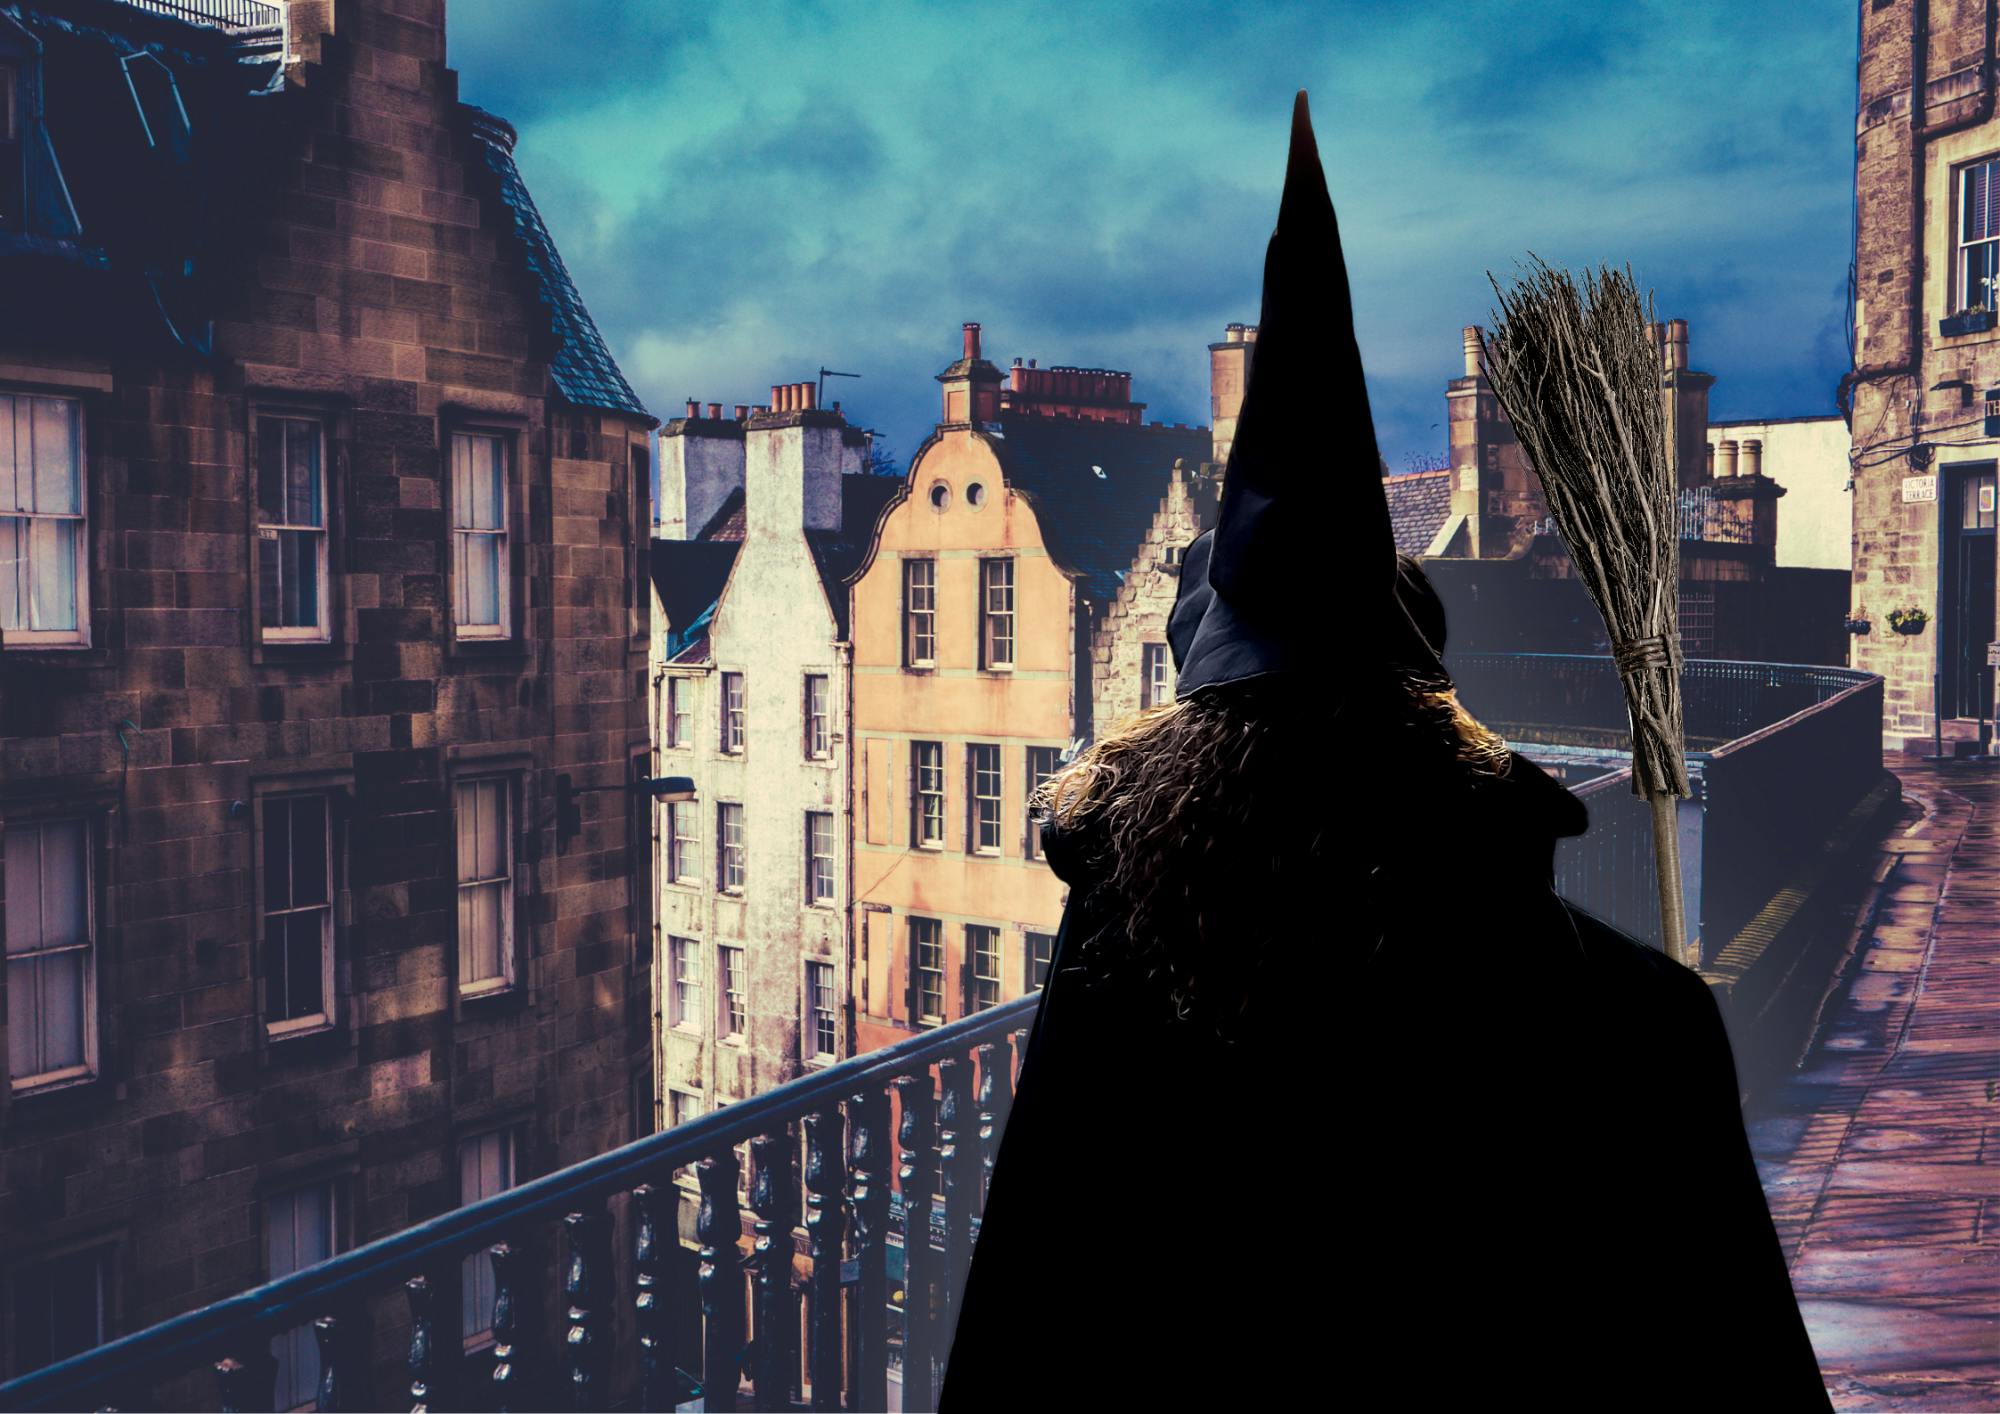 The Edinburgh witches and history guided walking tour Musement